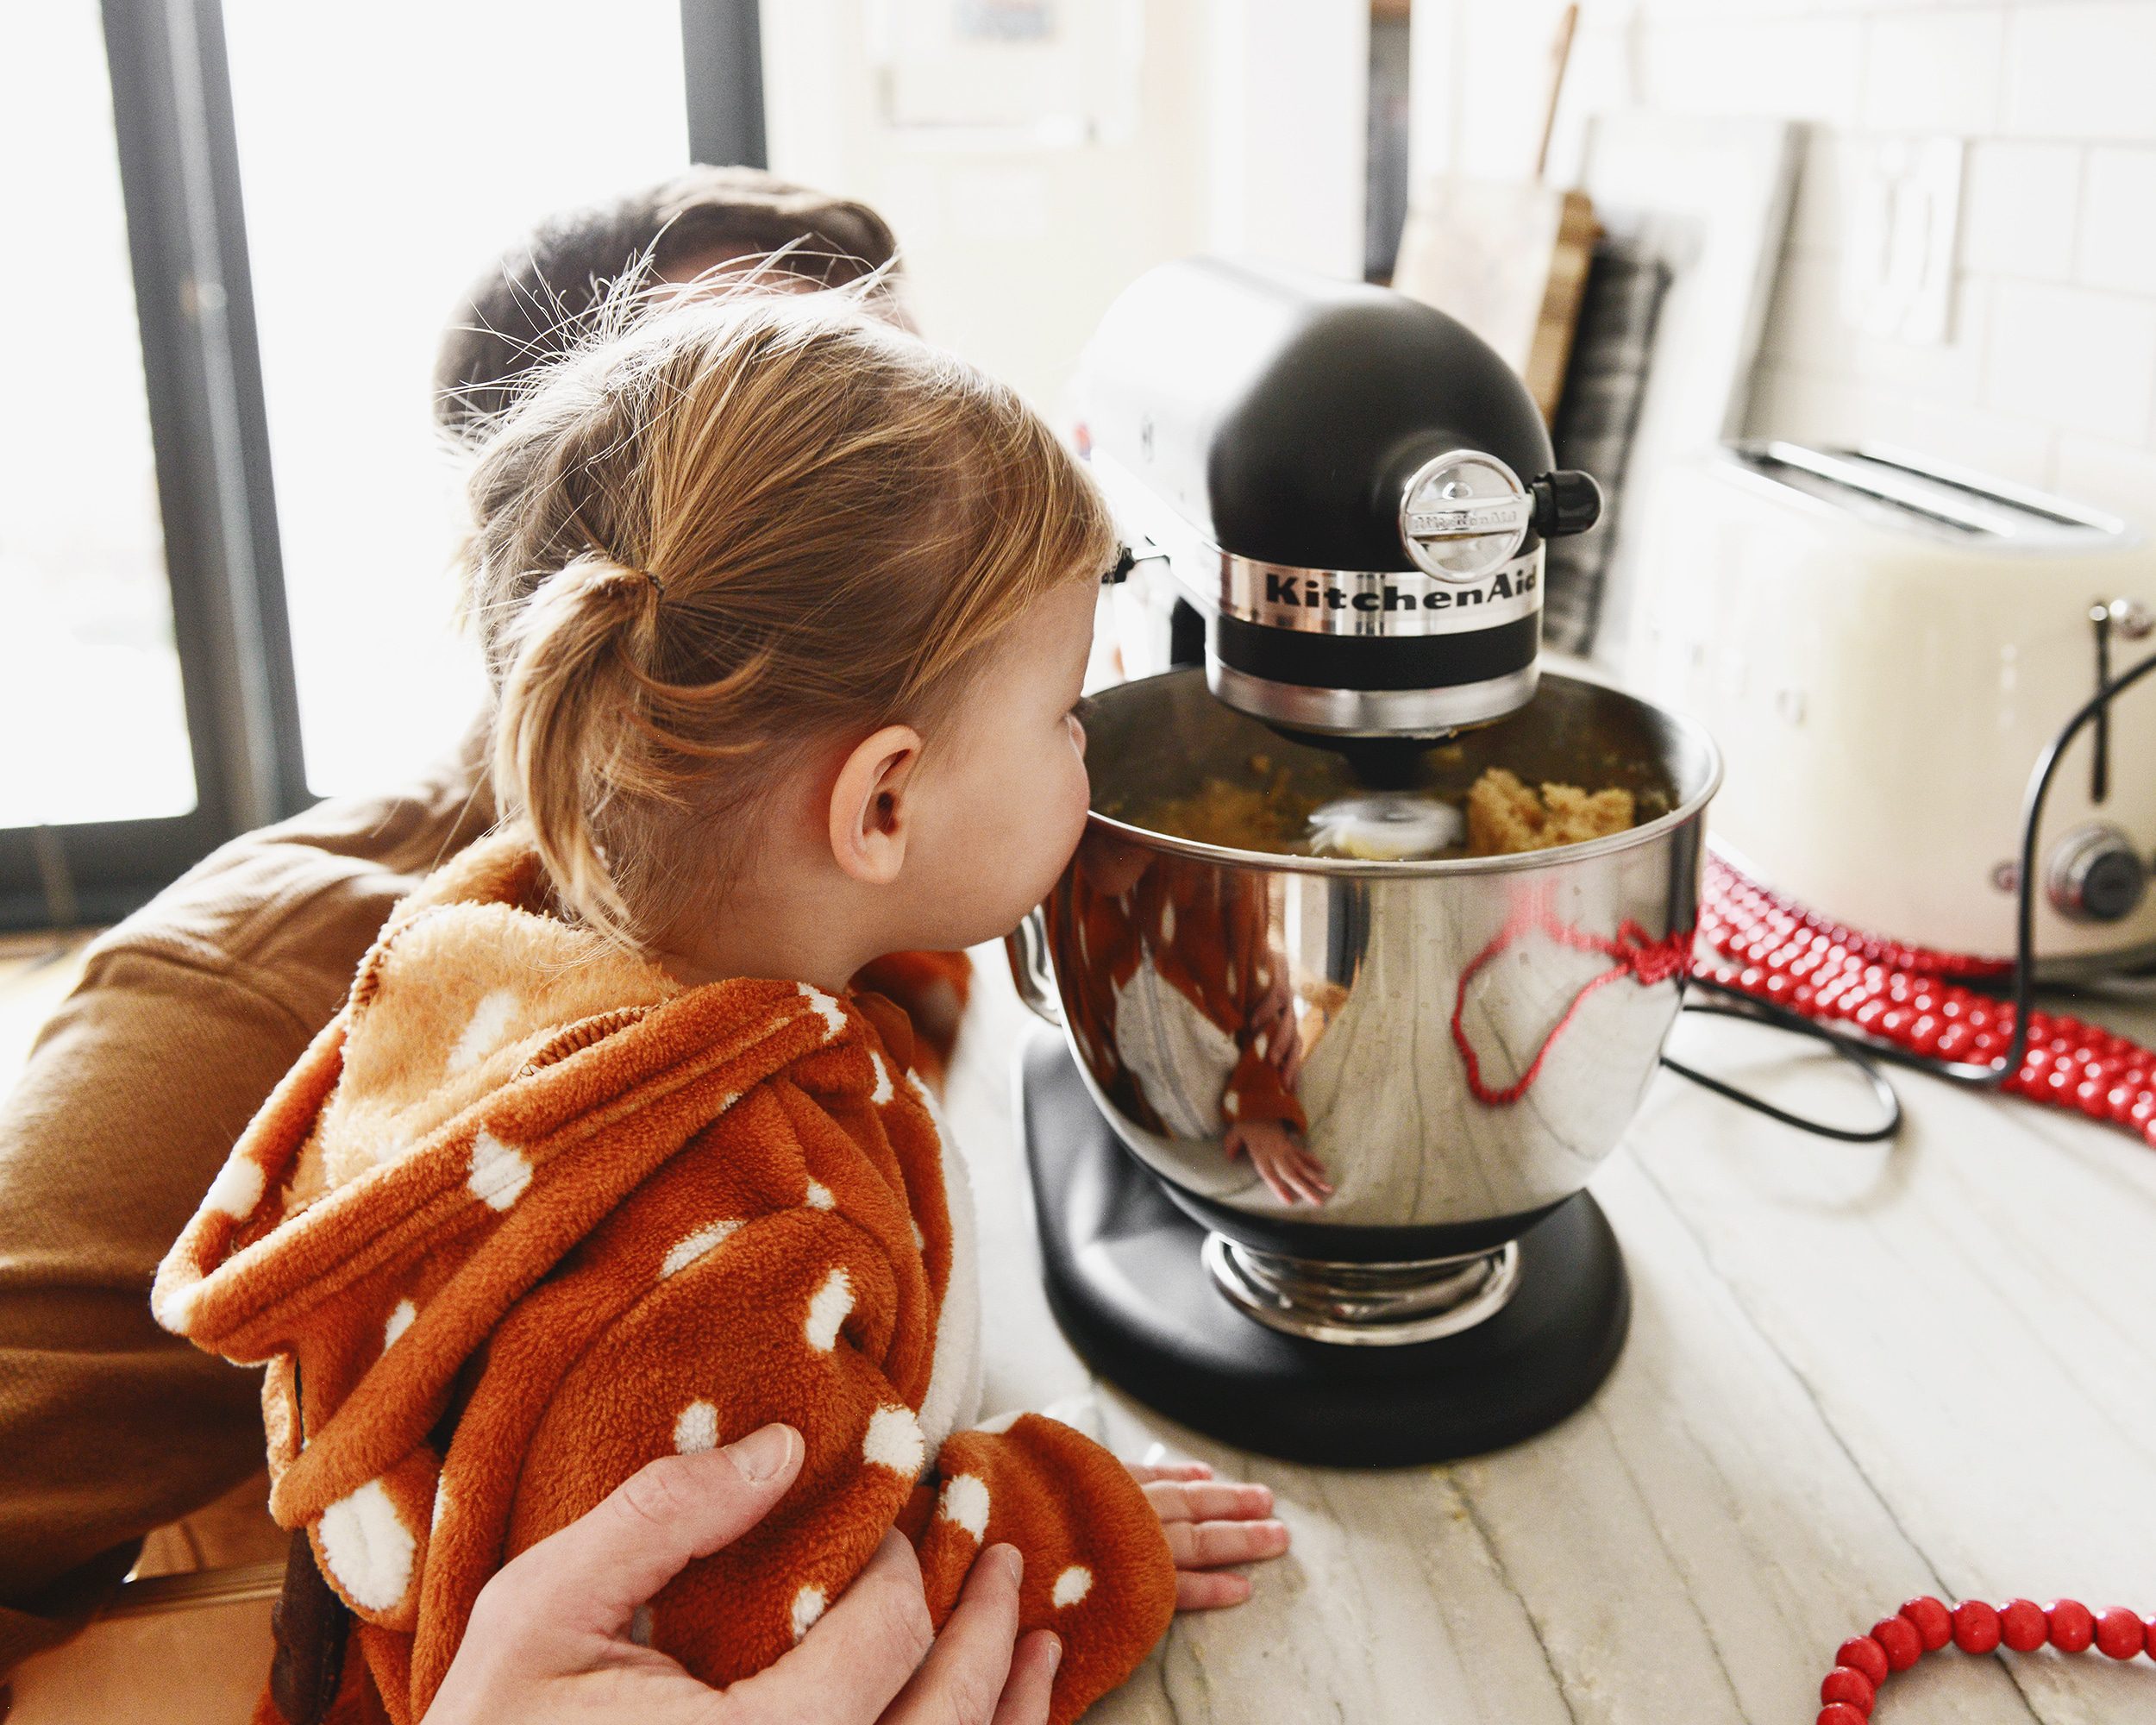 Scott and Lucy peer over the edge of a KitchenAid mixer to ensure the cookies are looking good! The best chocolate chip cookie recipe via Yellow Brick Home